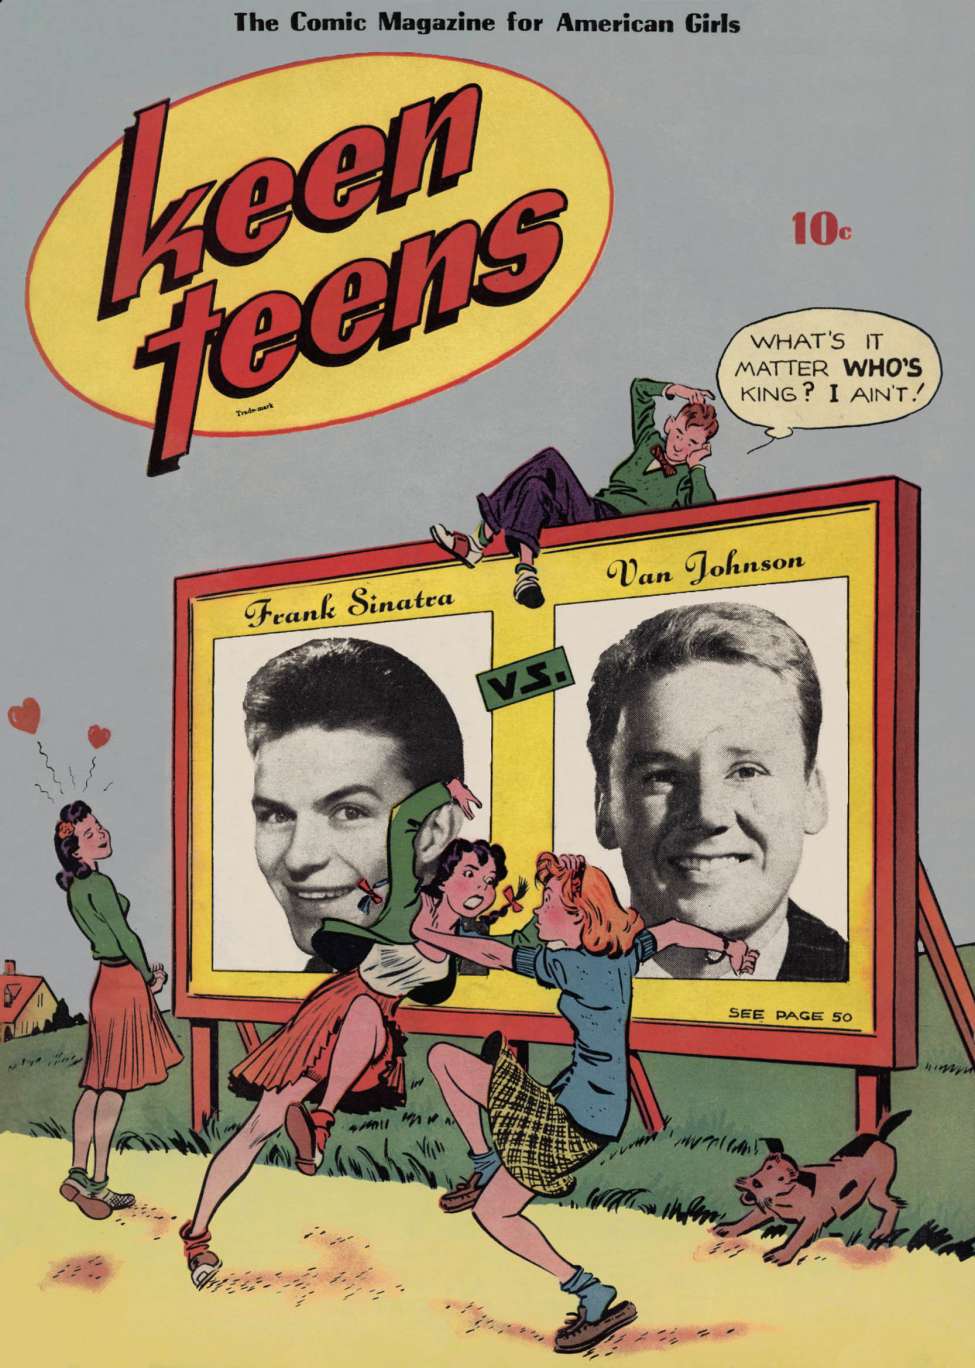 Comic Book Cover For Keen Teens 1